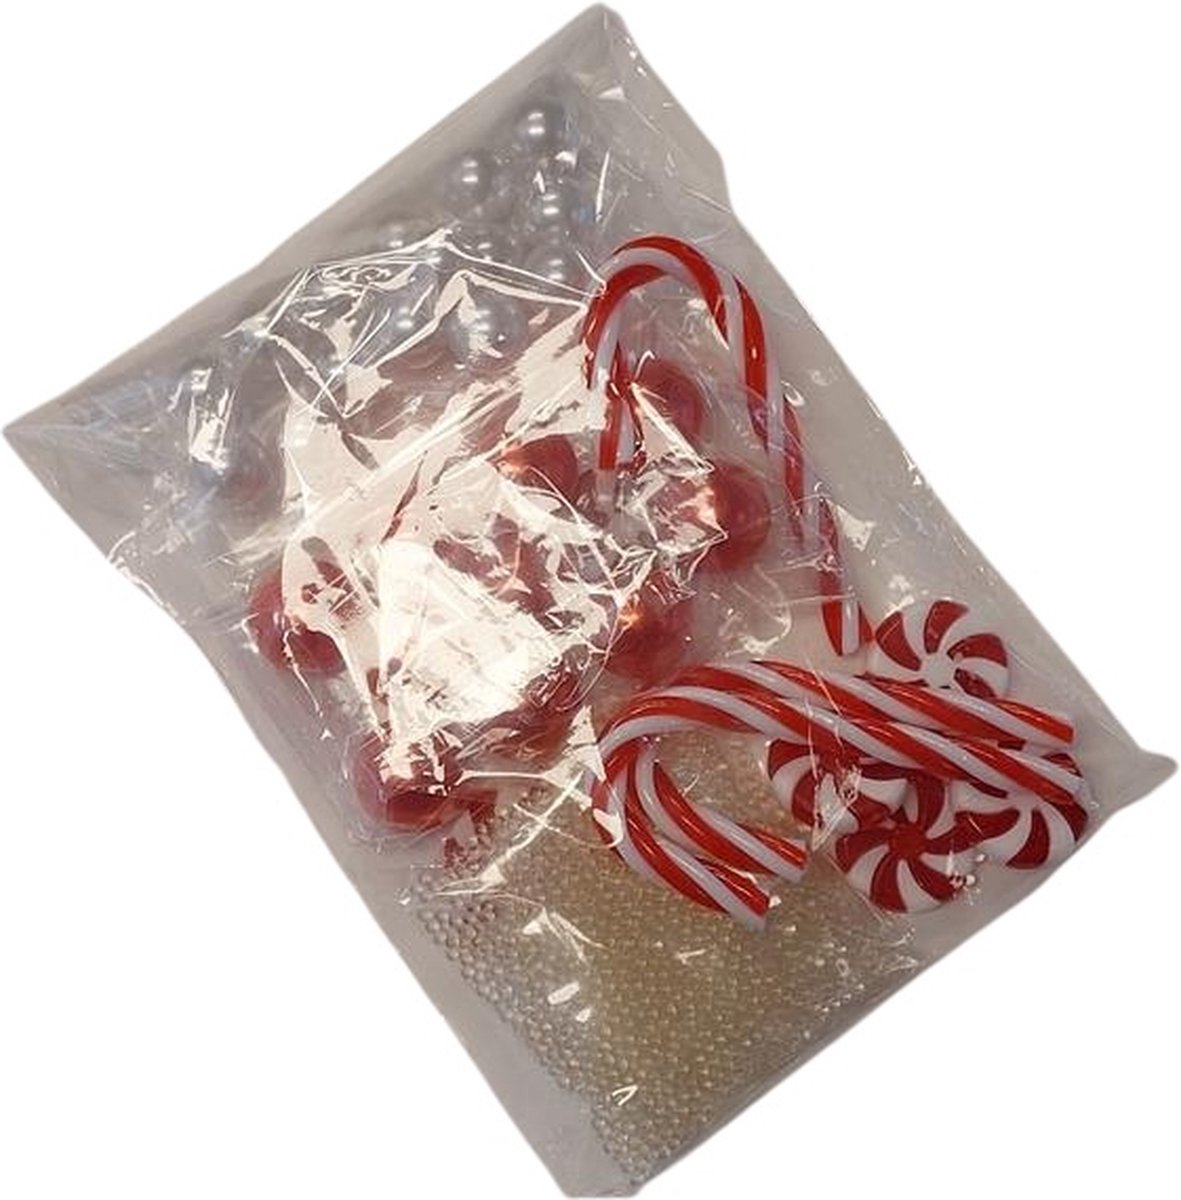 HBX natural living Deco Waterparels Candy zakje a 120gr rood wit